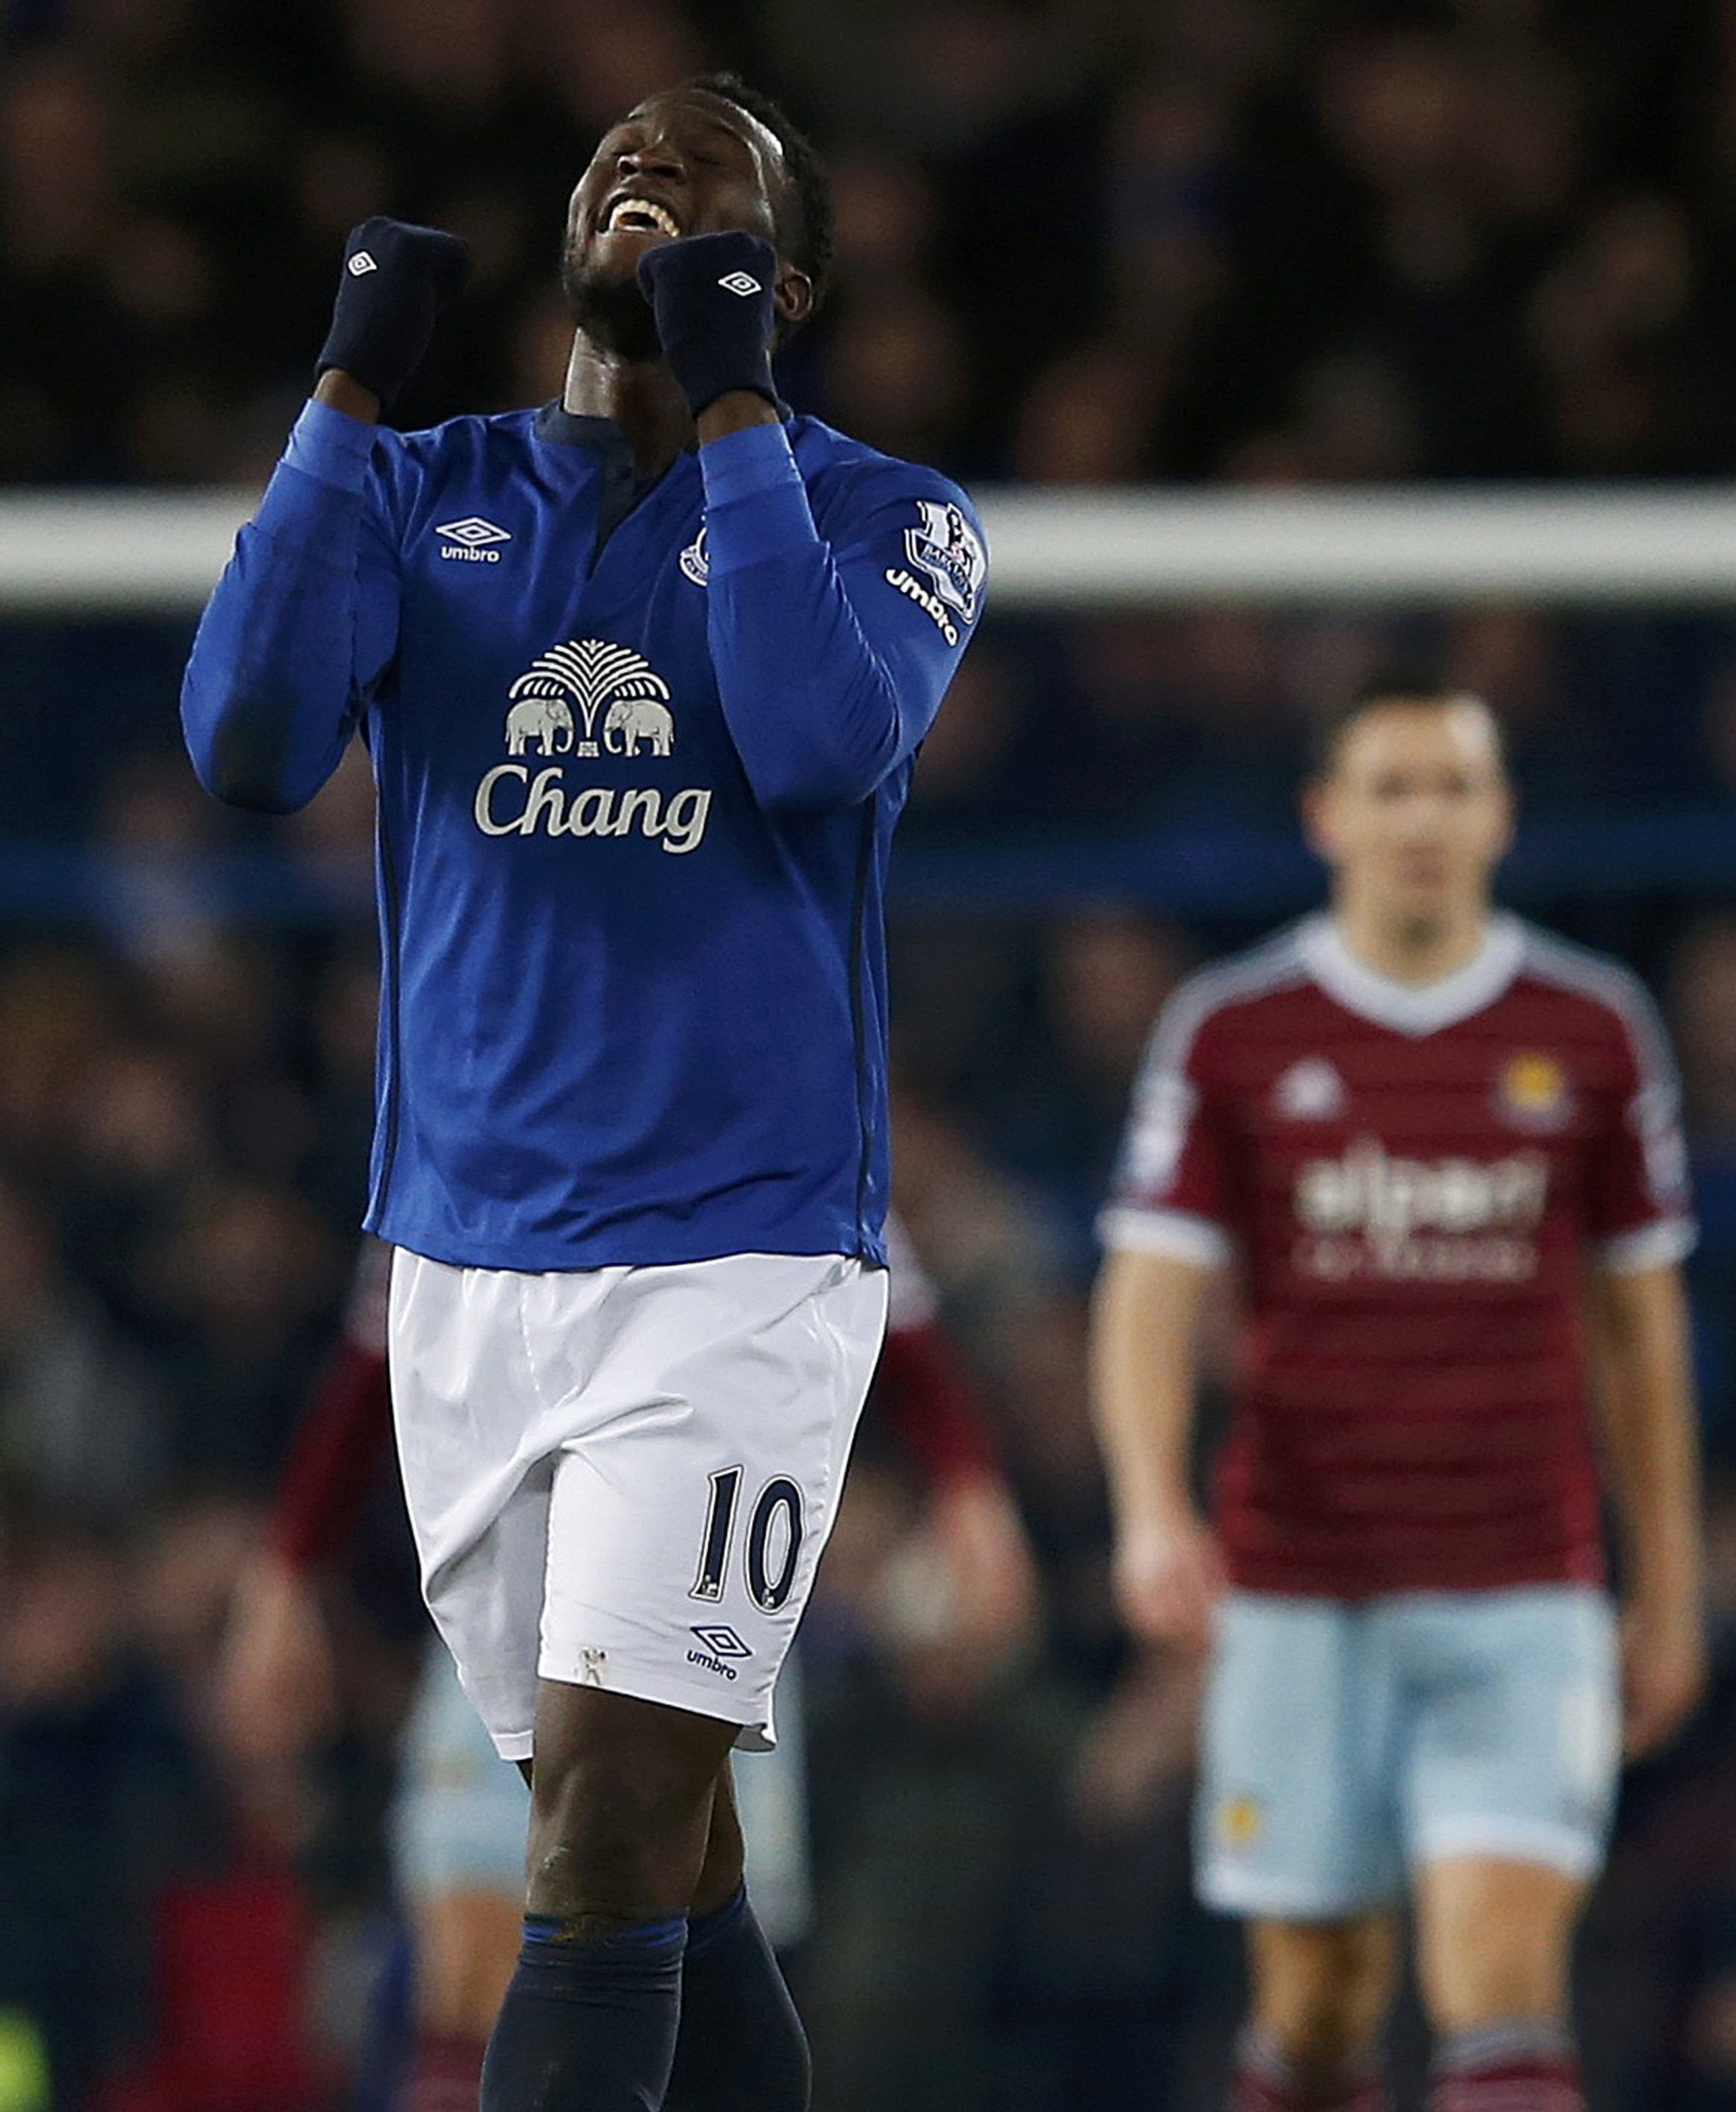 Everton's Lukaku celebrates his goal against West Ham United during their FA Cup third round soccer match in Liverpool